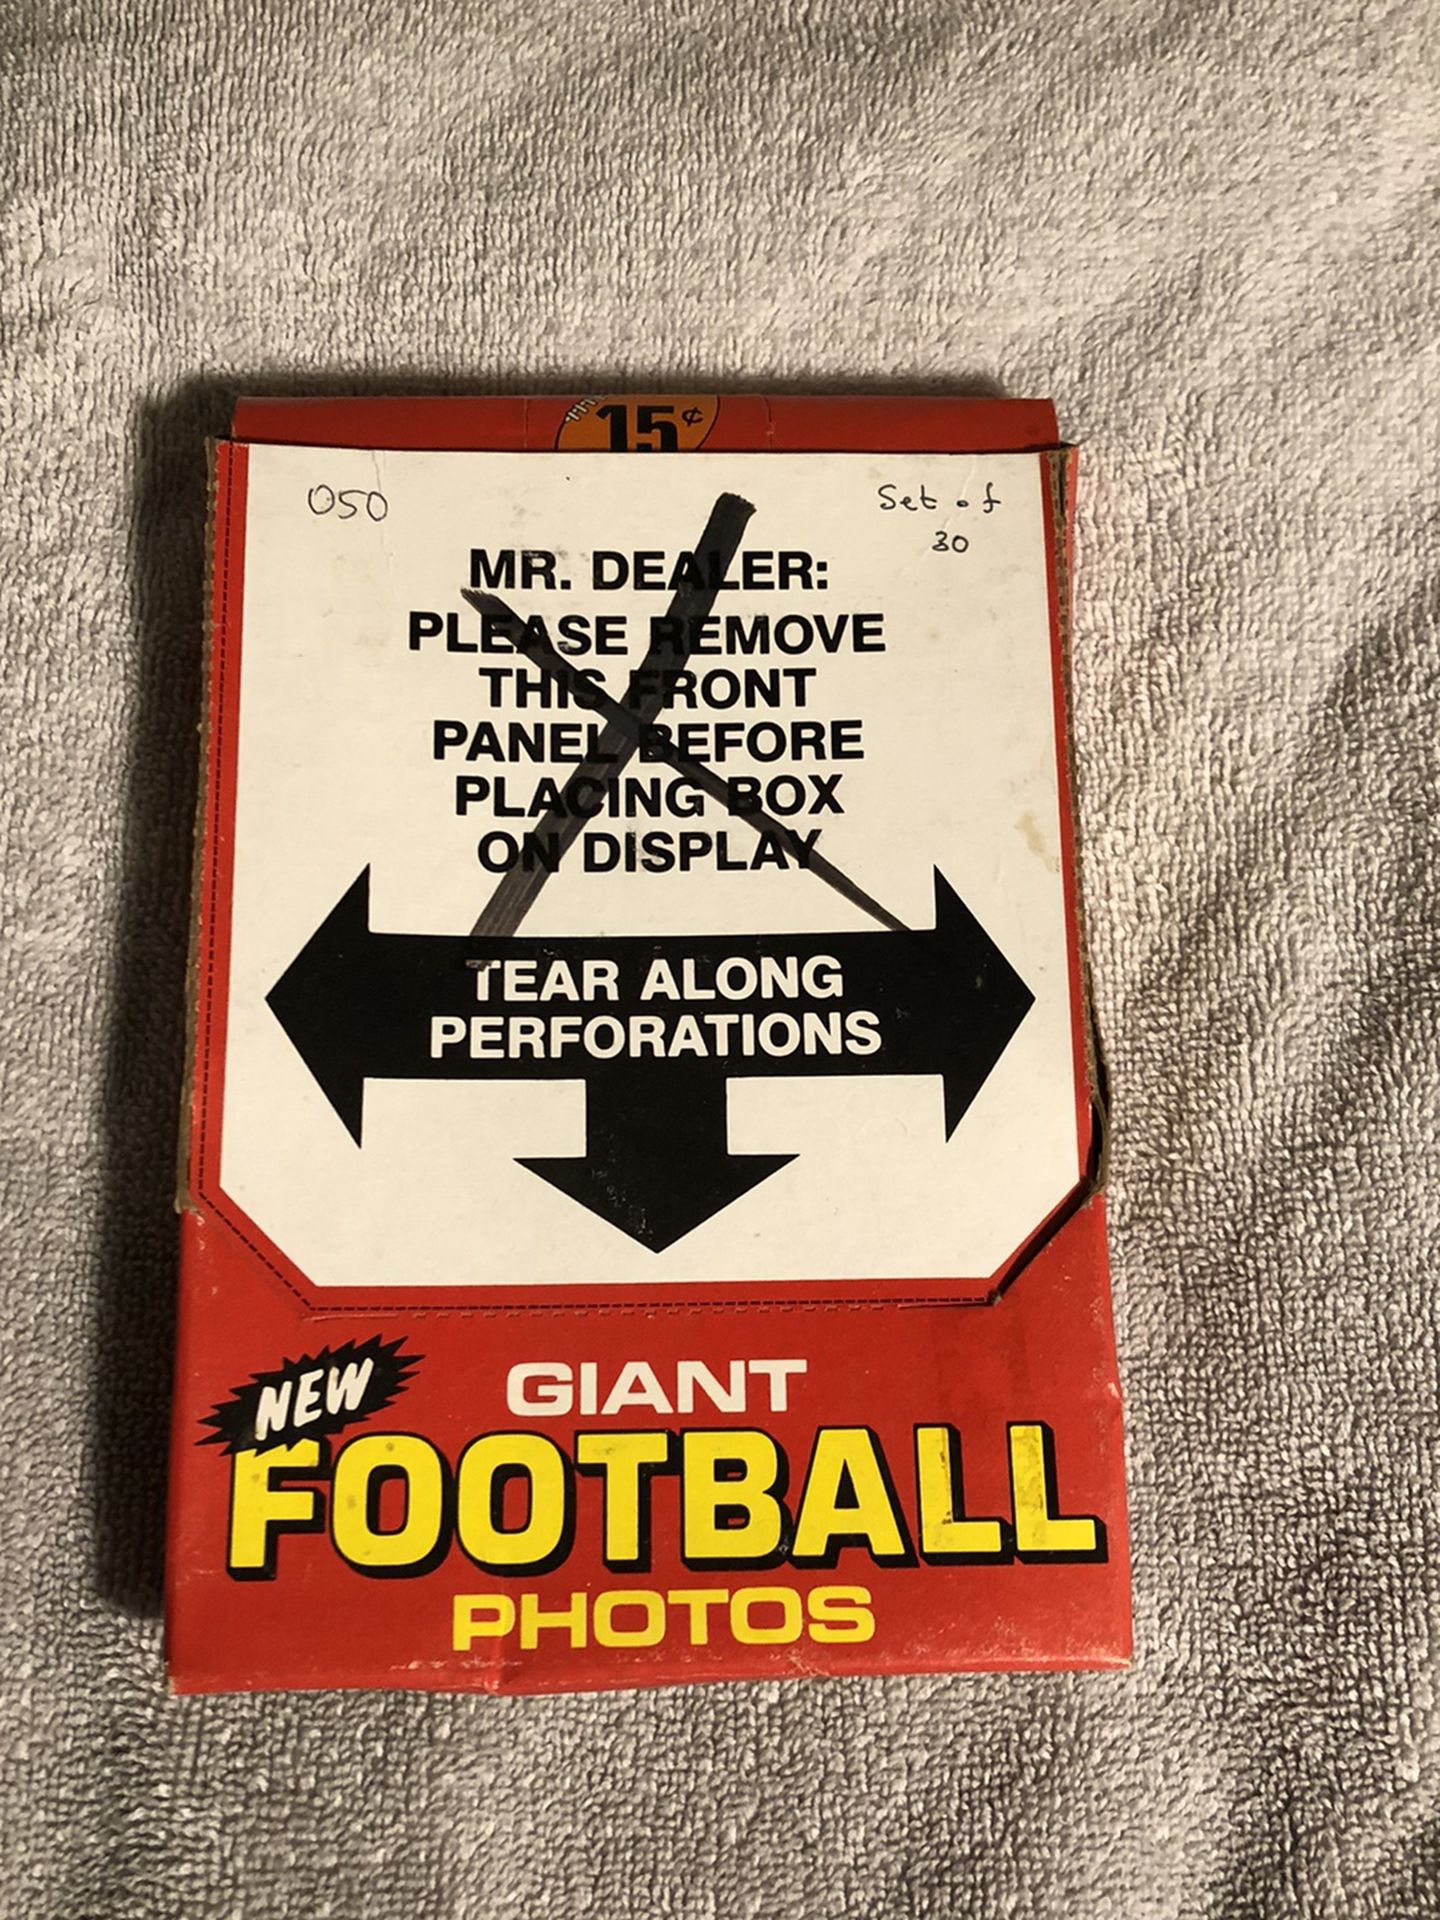 Extra large Topps football cards